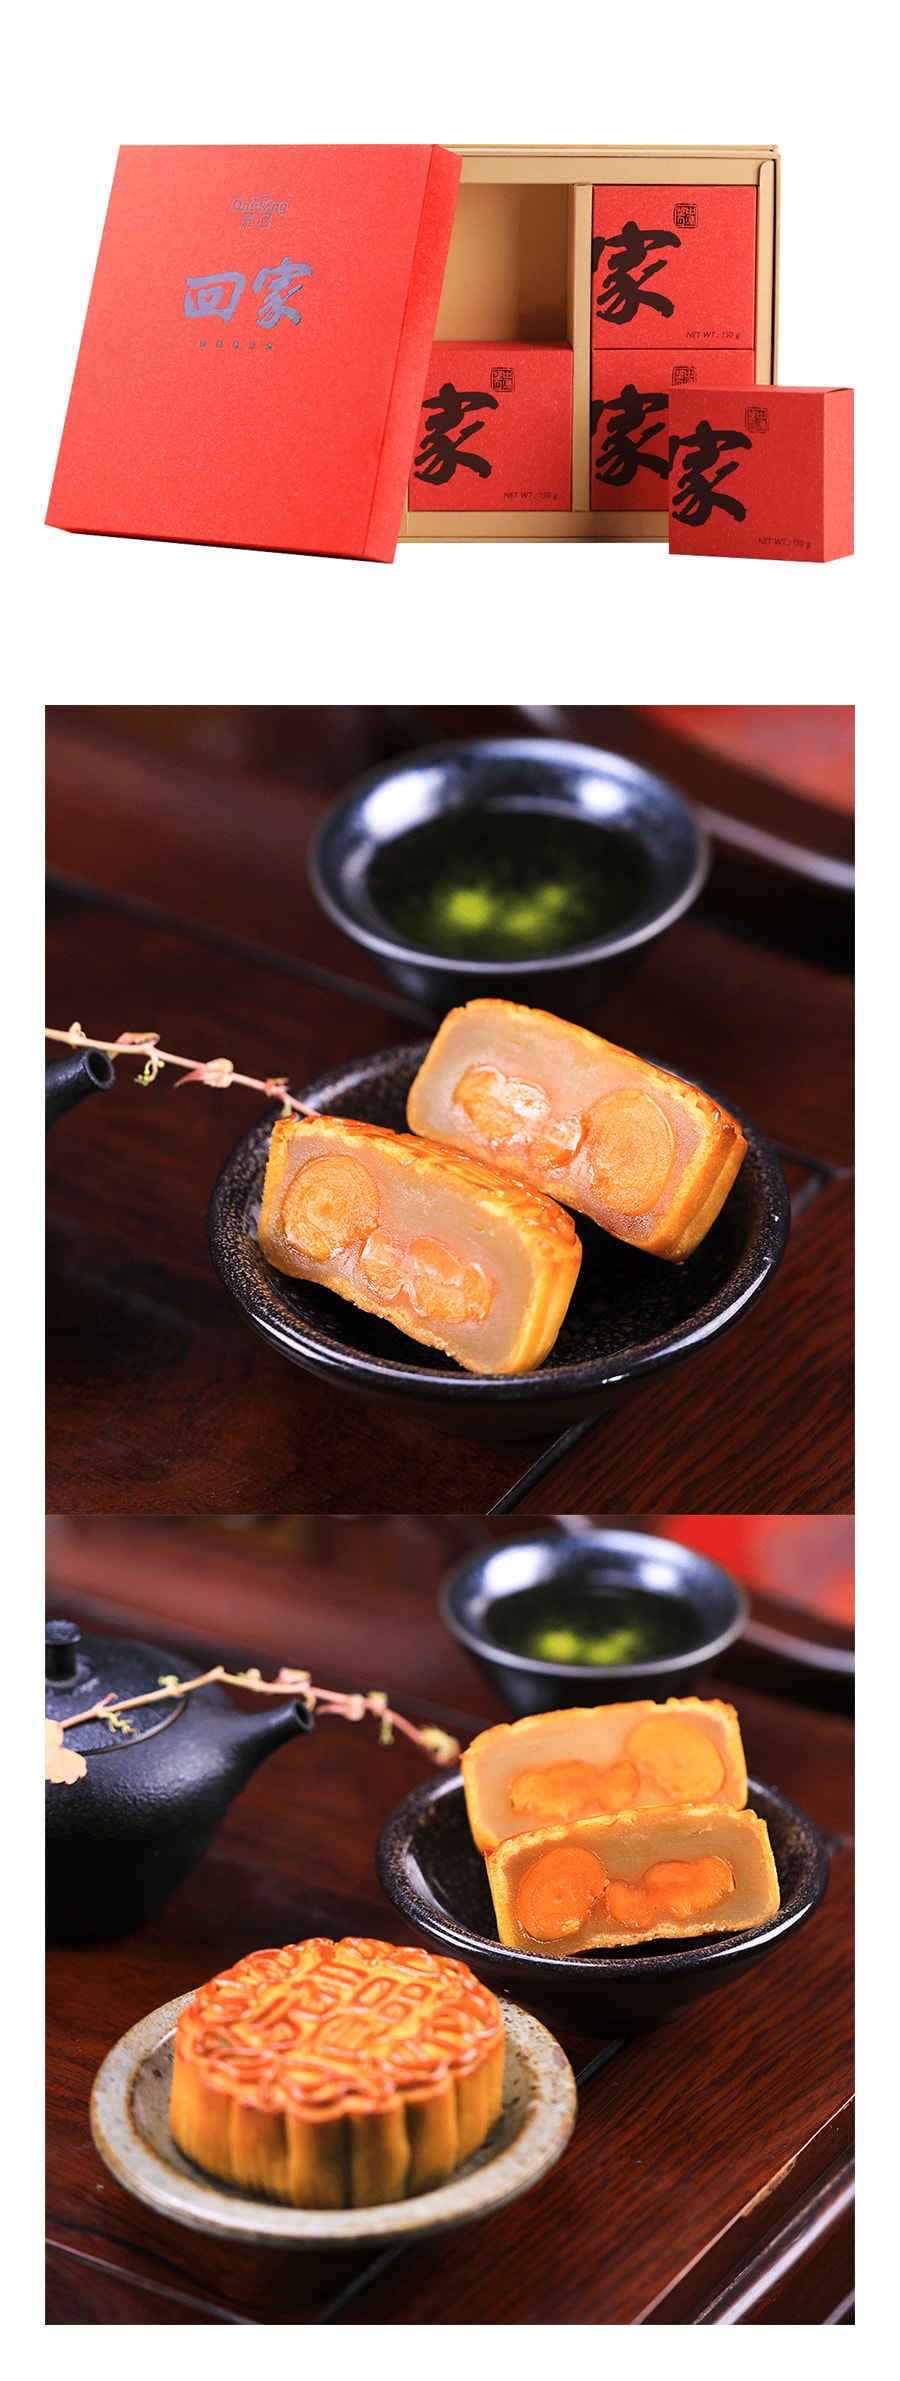 ONETANG Lotus Seed Paste Mooncake With 2 Egg Yolks 4pc 600g 【Delivery Date: End of August】